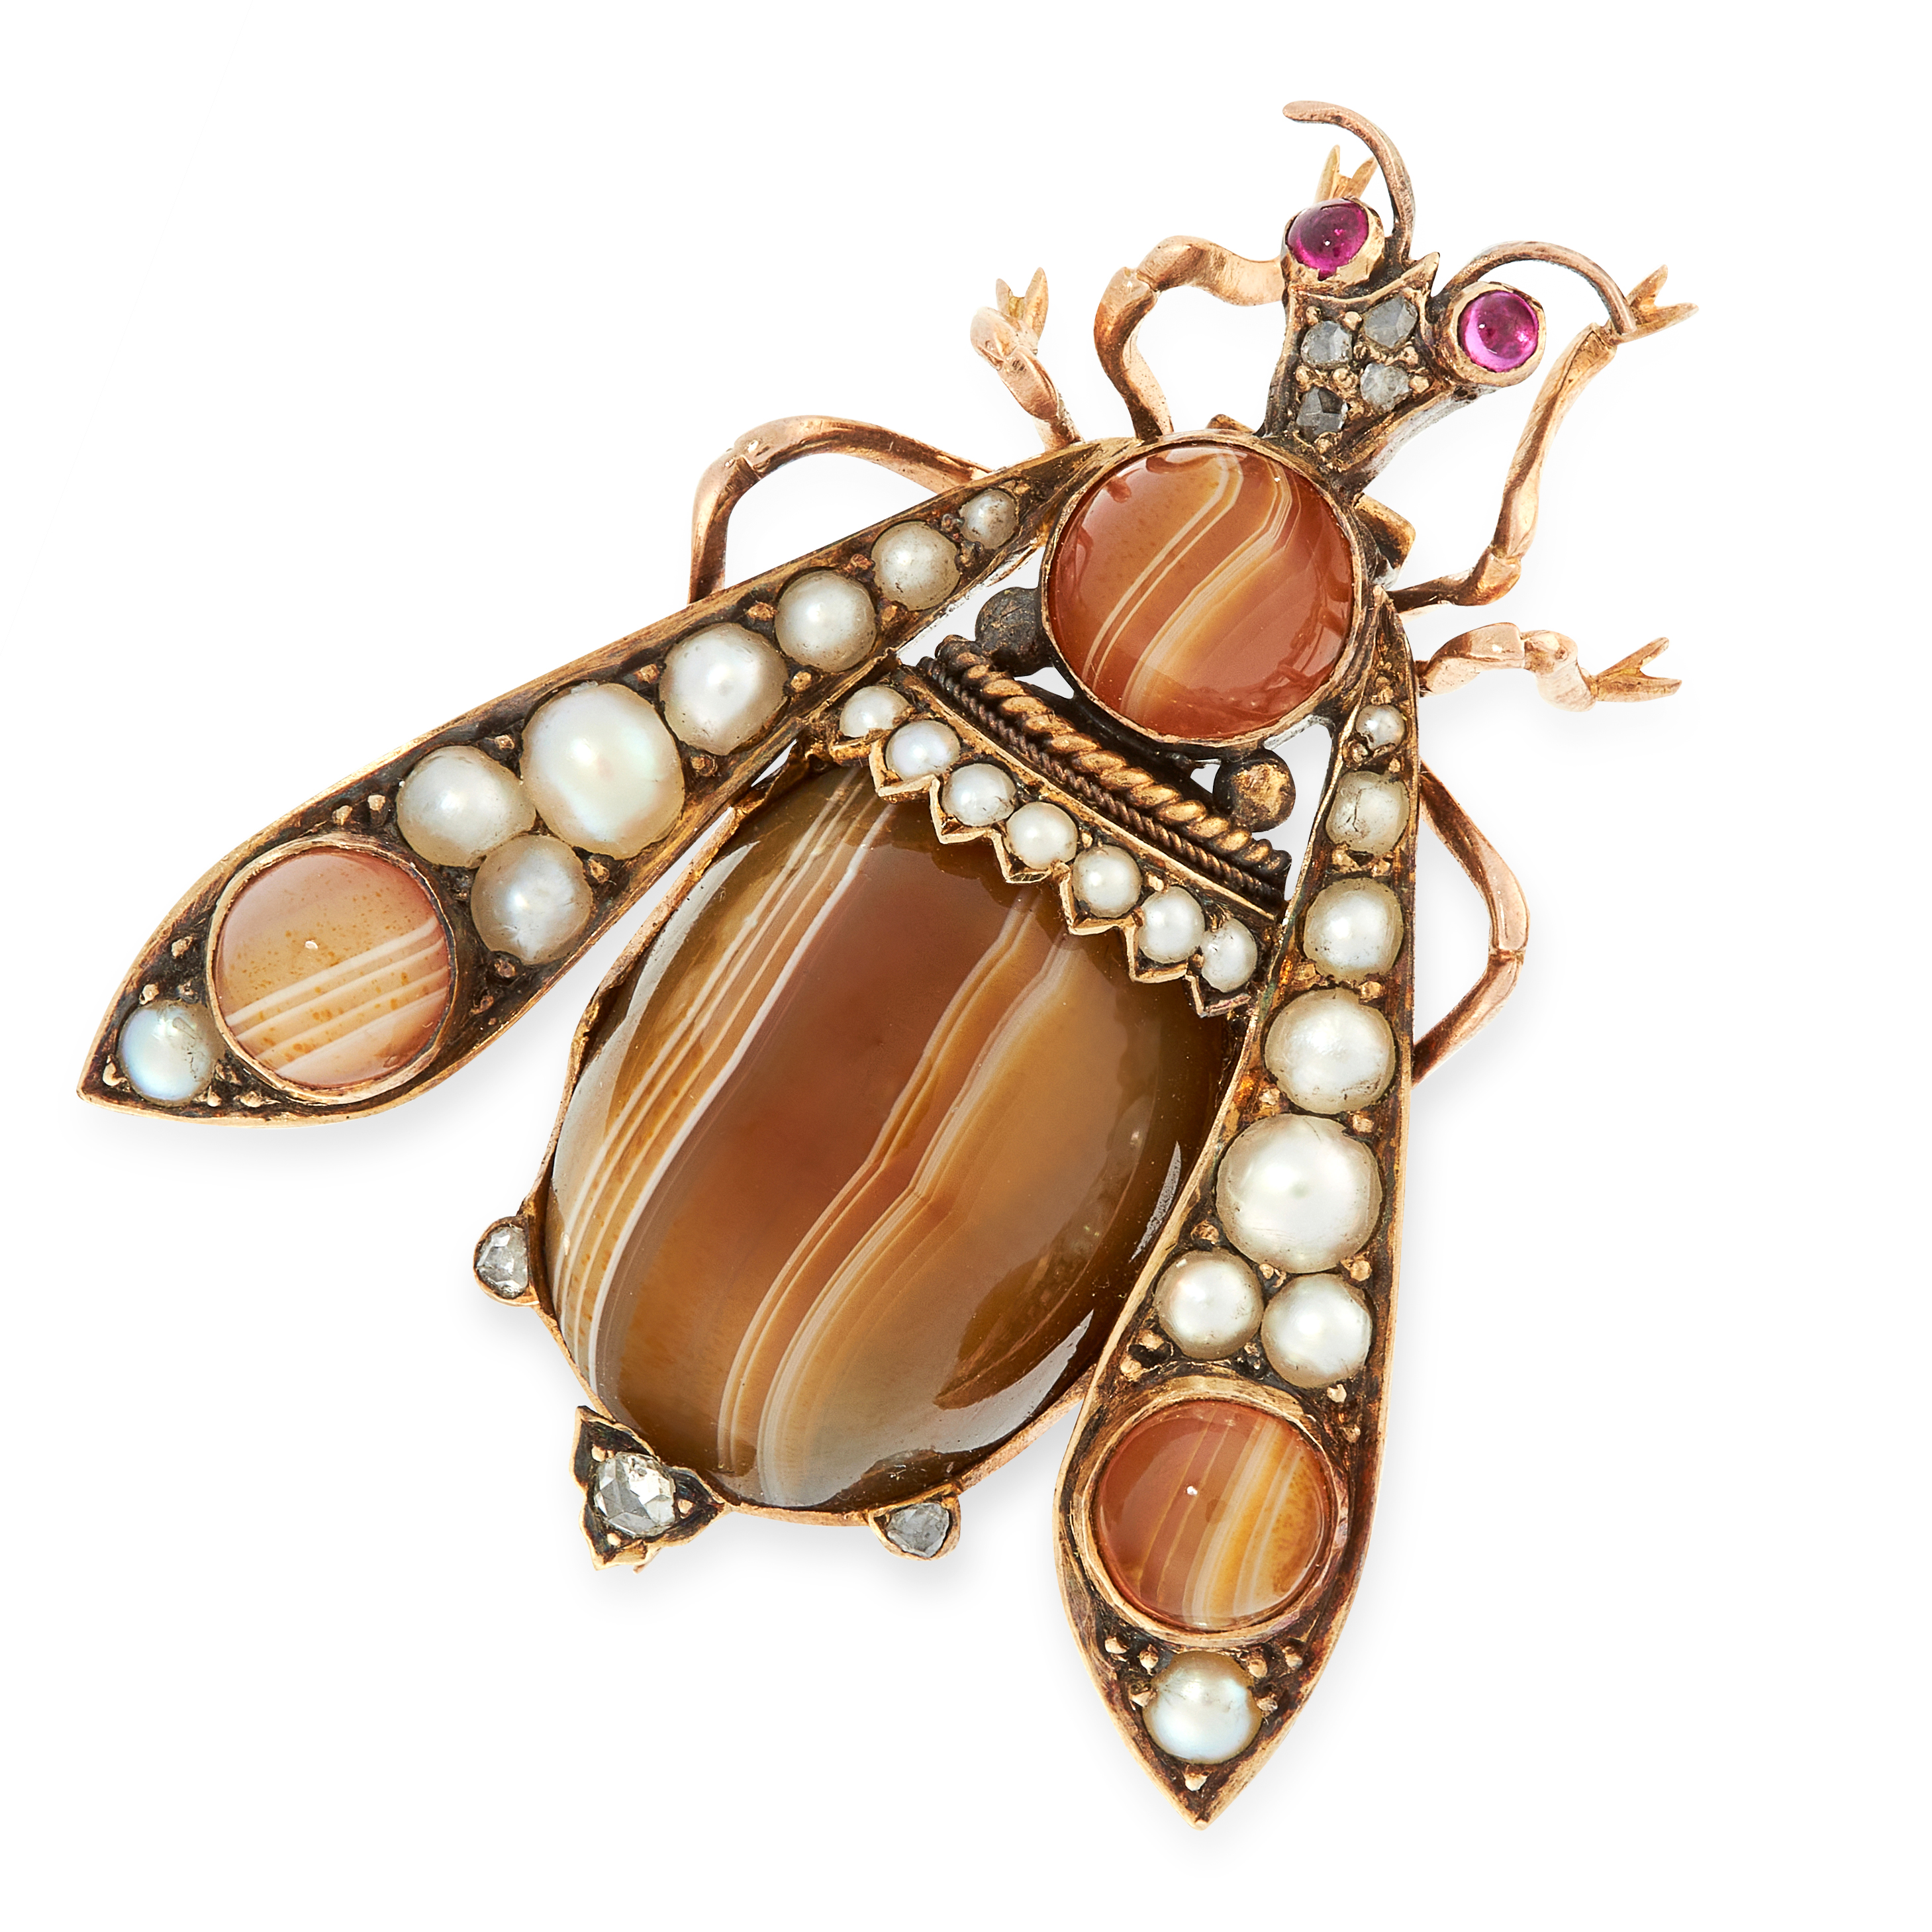 AN ANTIQUE BANDED AGATE, PEARL, RUBY AND DIAMOND BUG BROOCH in yellow gold, designed as a fly, the